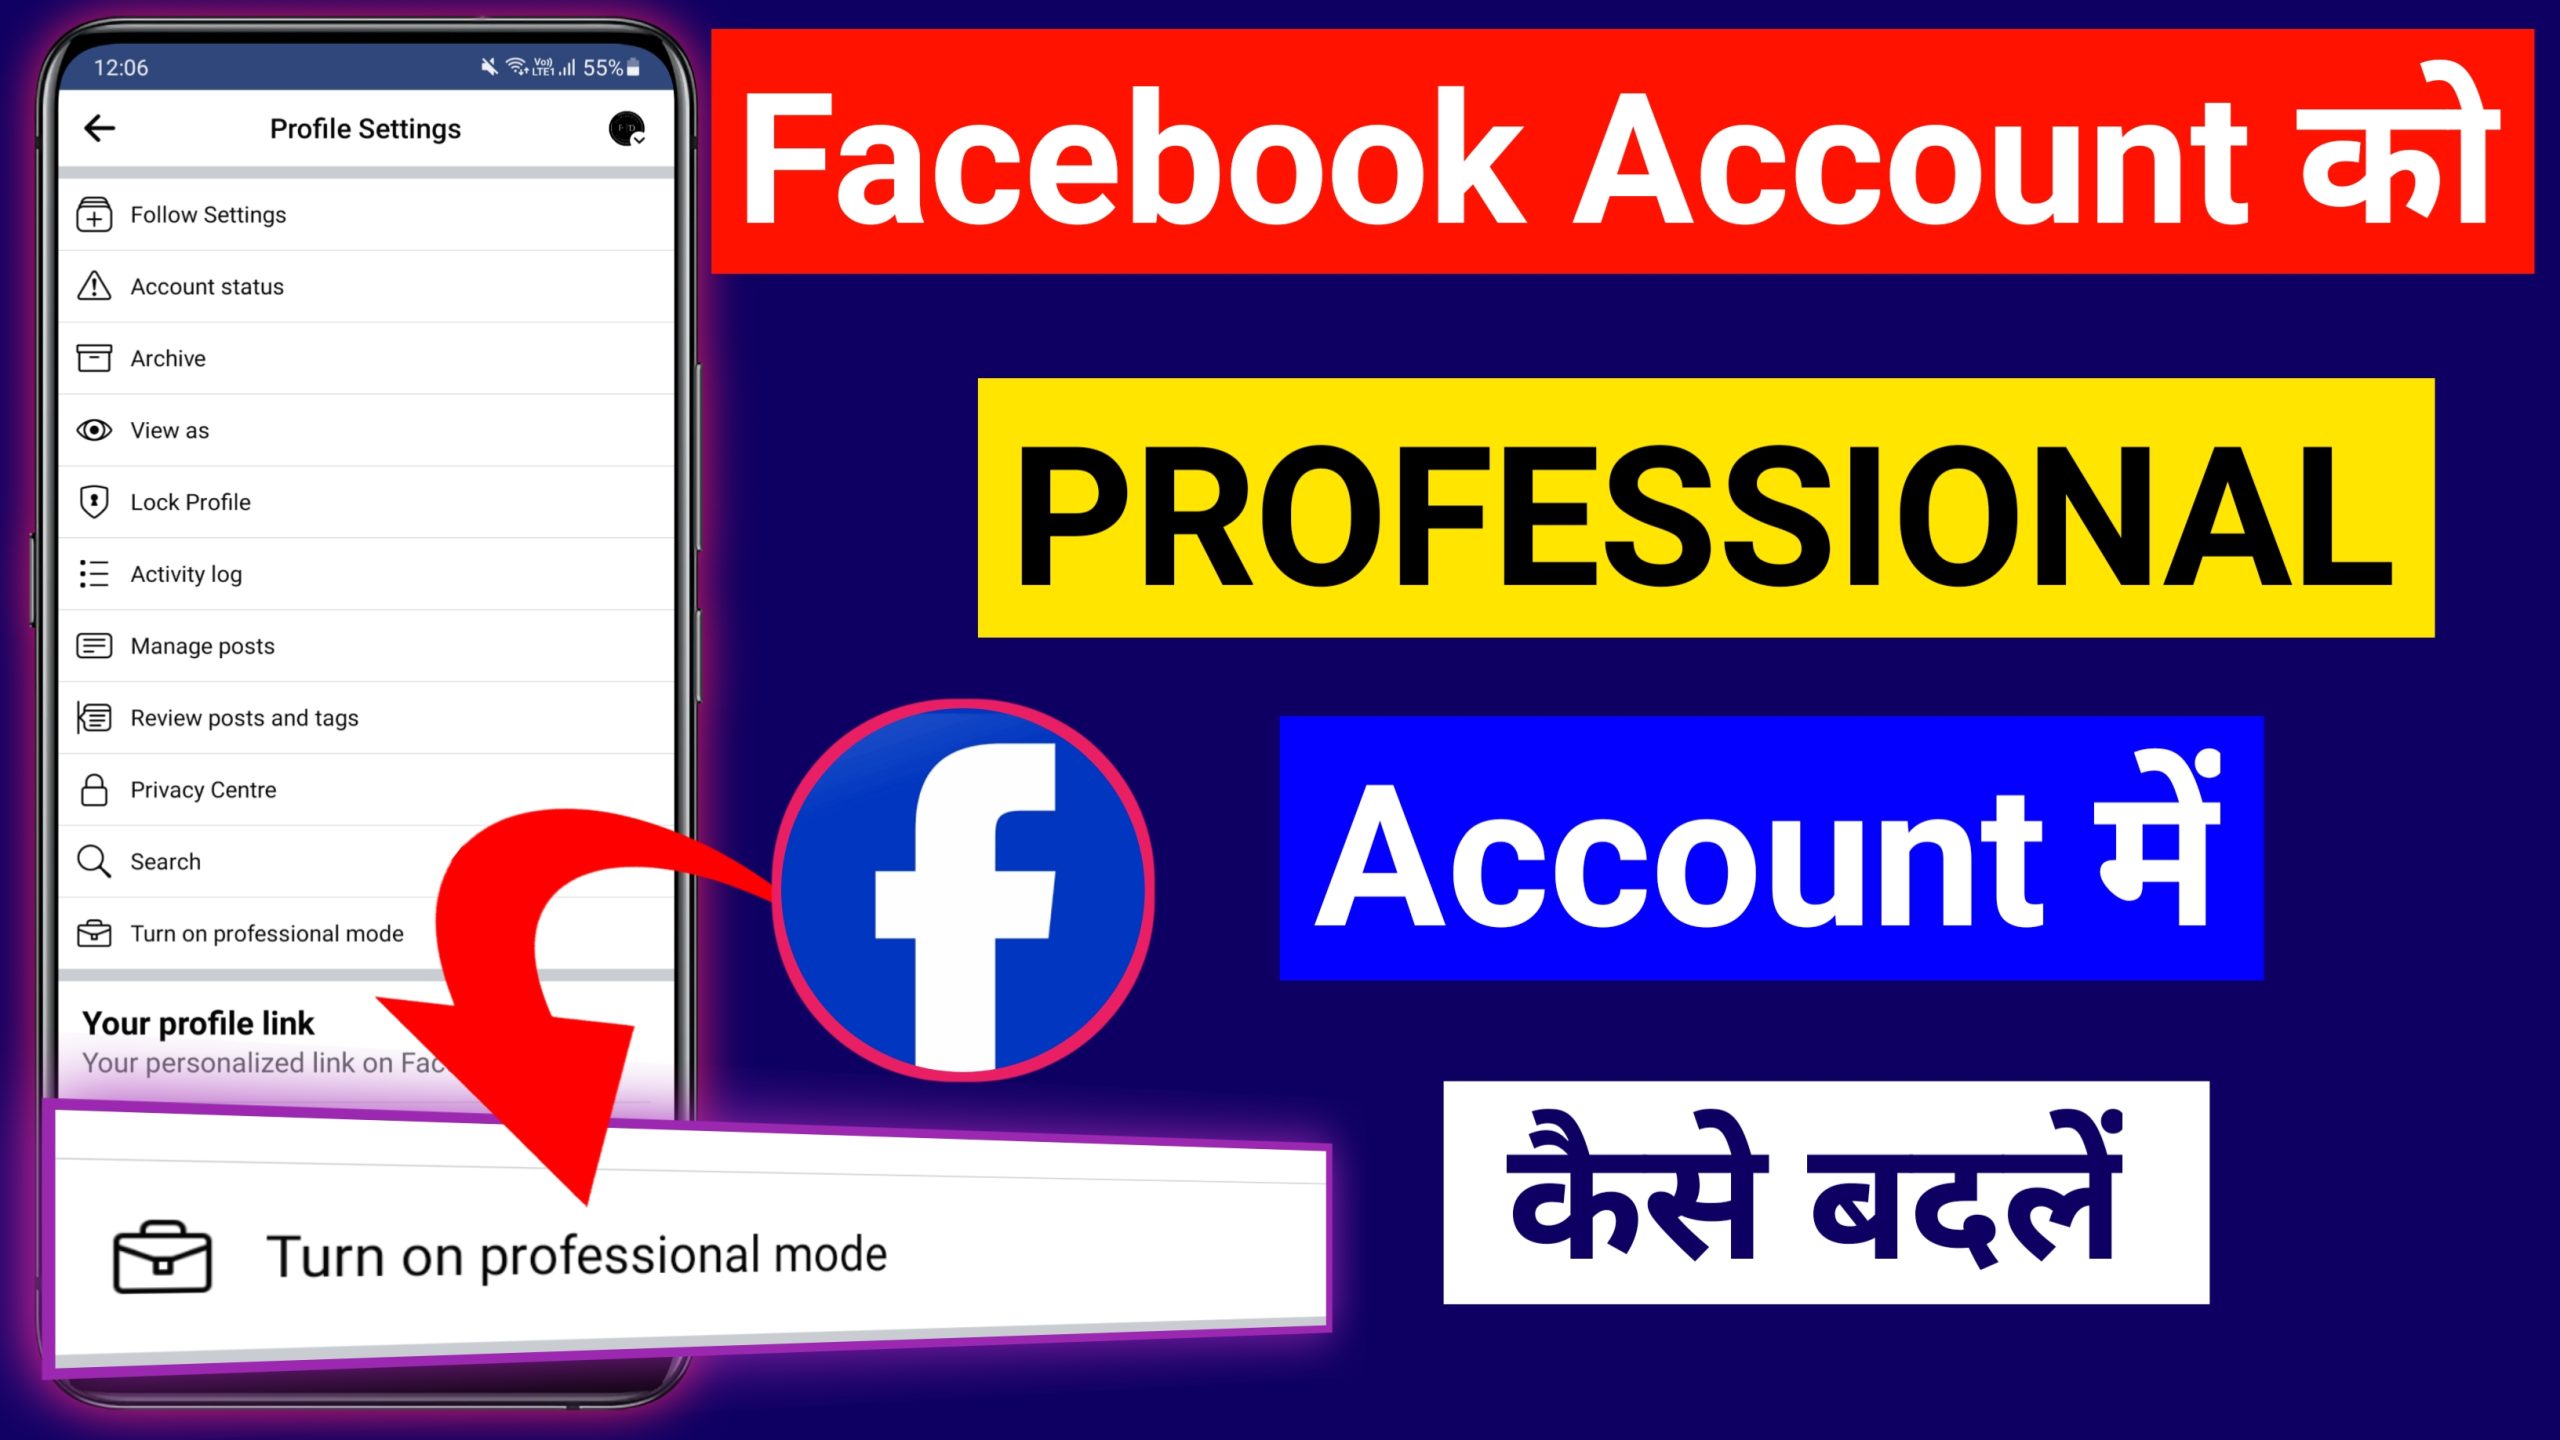 How to Convert Facebook Account to Professional Account 